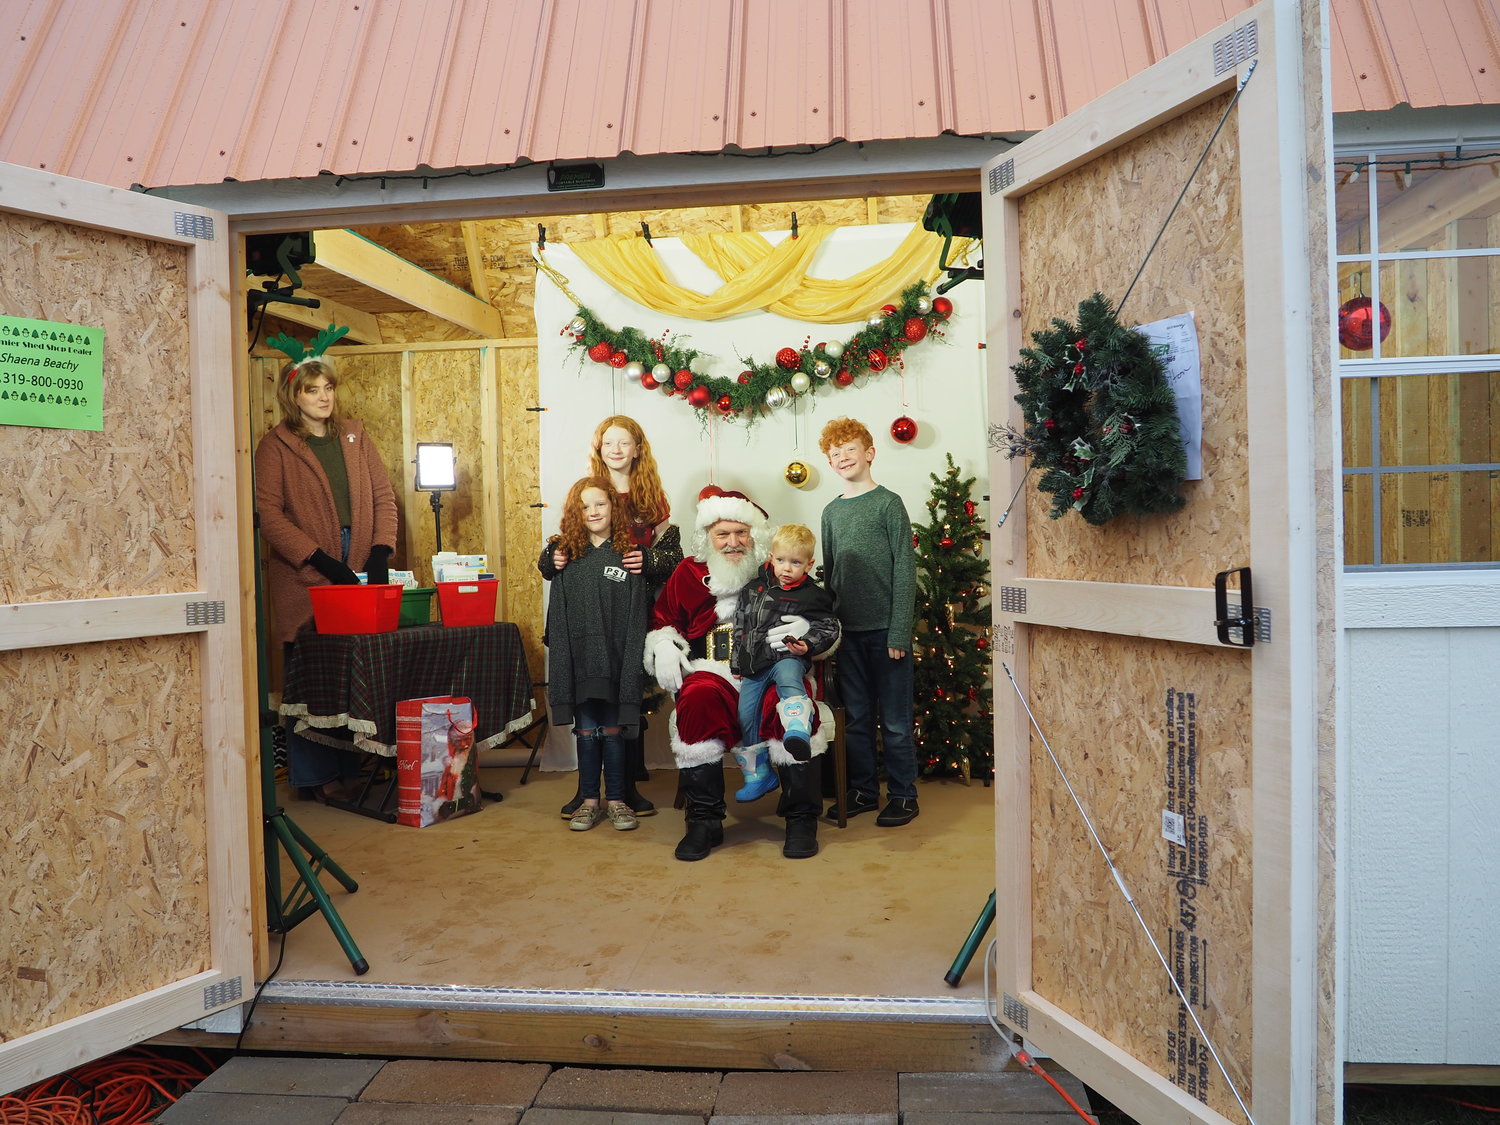 Kids enjoyed meeting Santa inside a shelter provided by Premier Portable Buildings, and every kid received a book from the Wellman-Scofield Public Library.  The library’s Carrie Geno also took photos that families can download free on the library’s website.